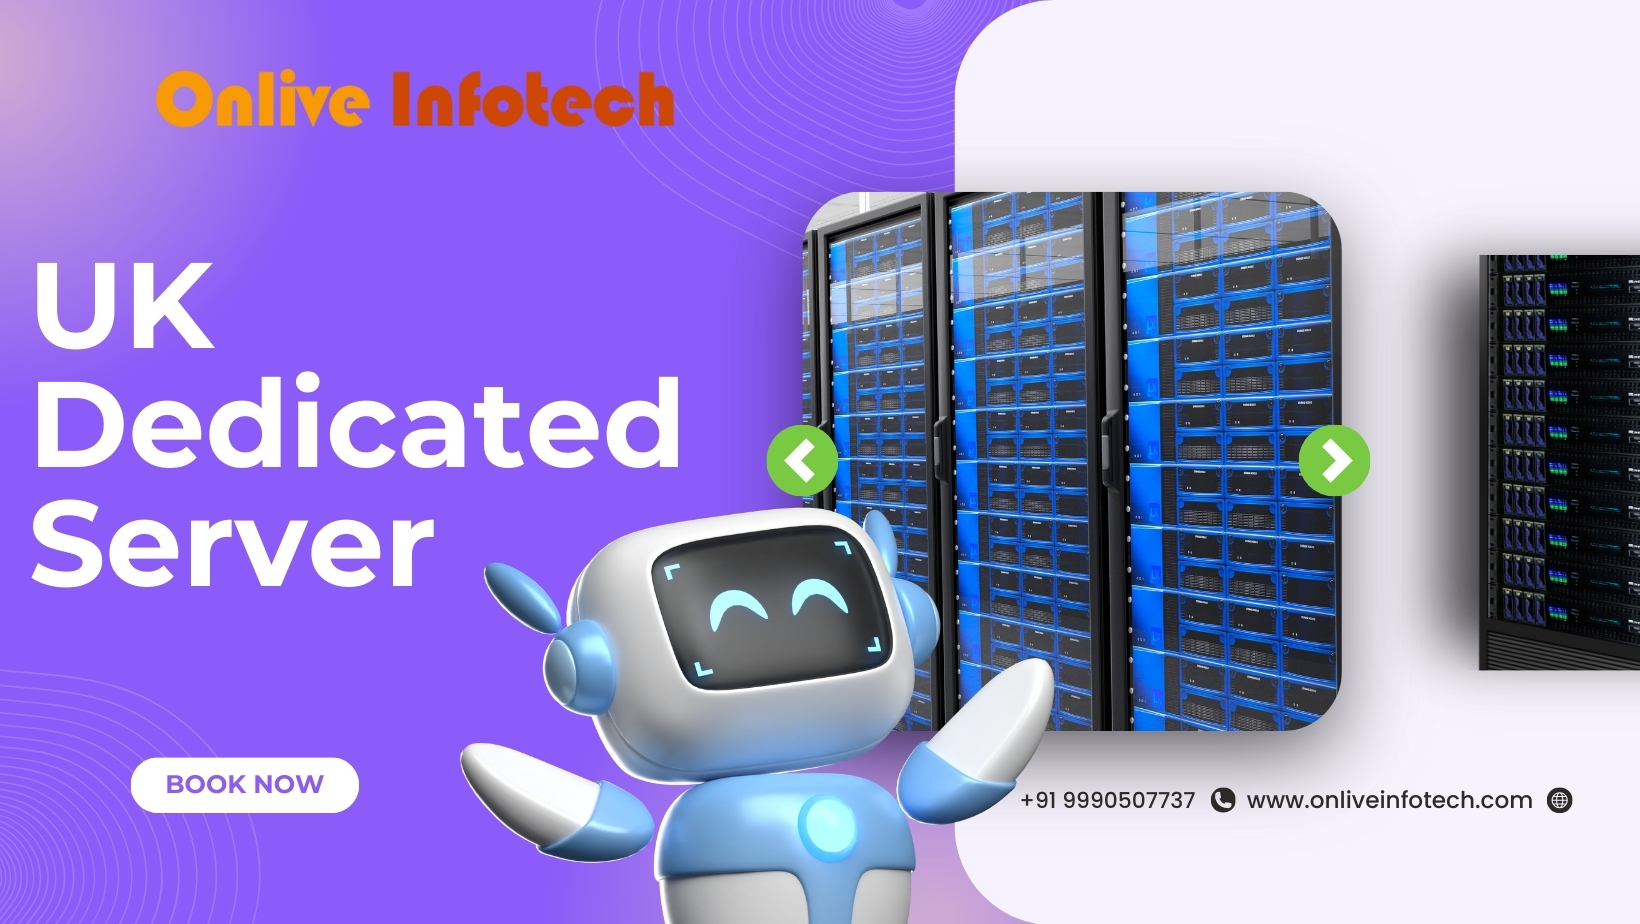 Maximize Your Business Efficiency with High-Performance UK Dedicated Server